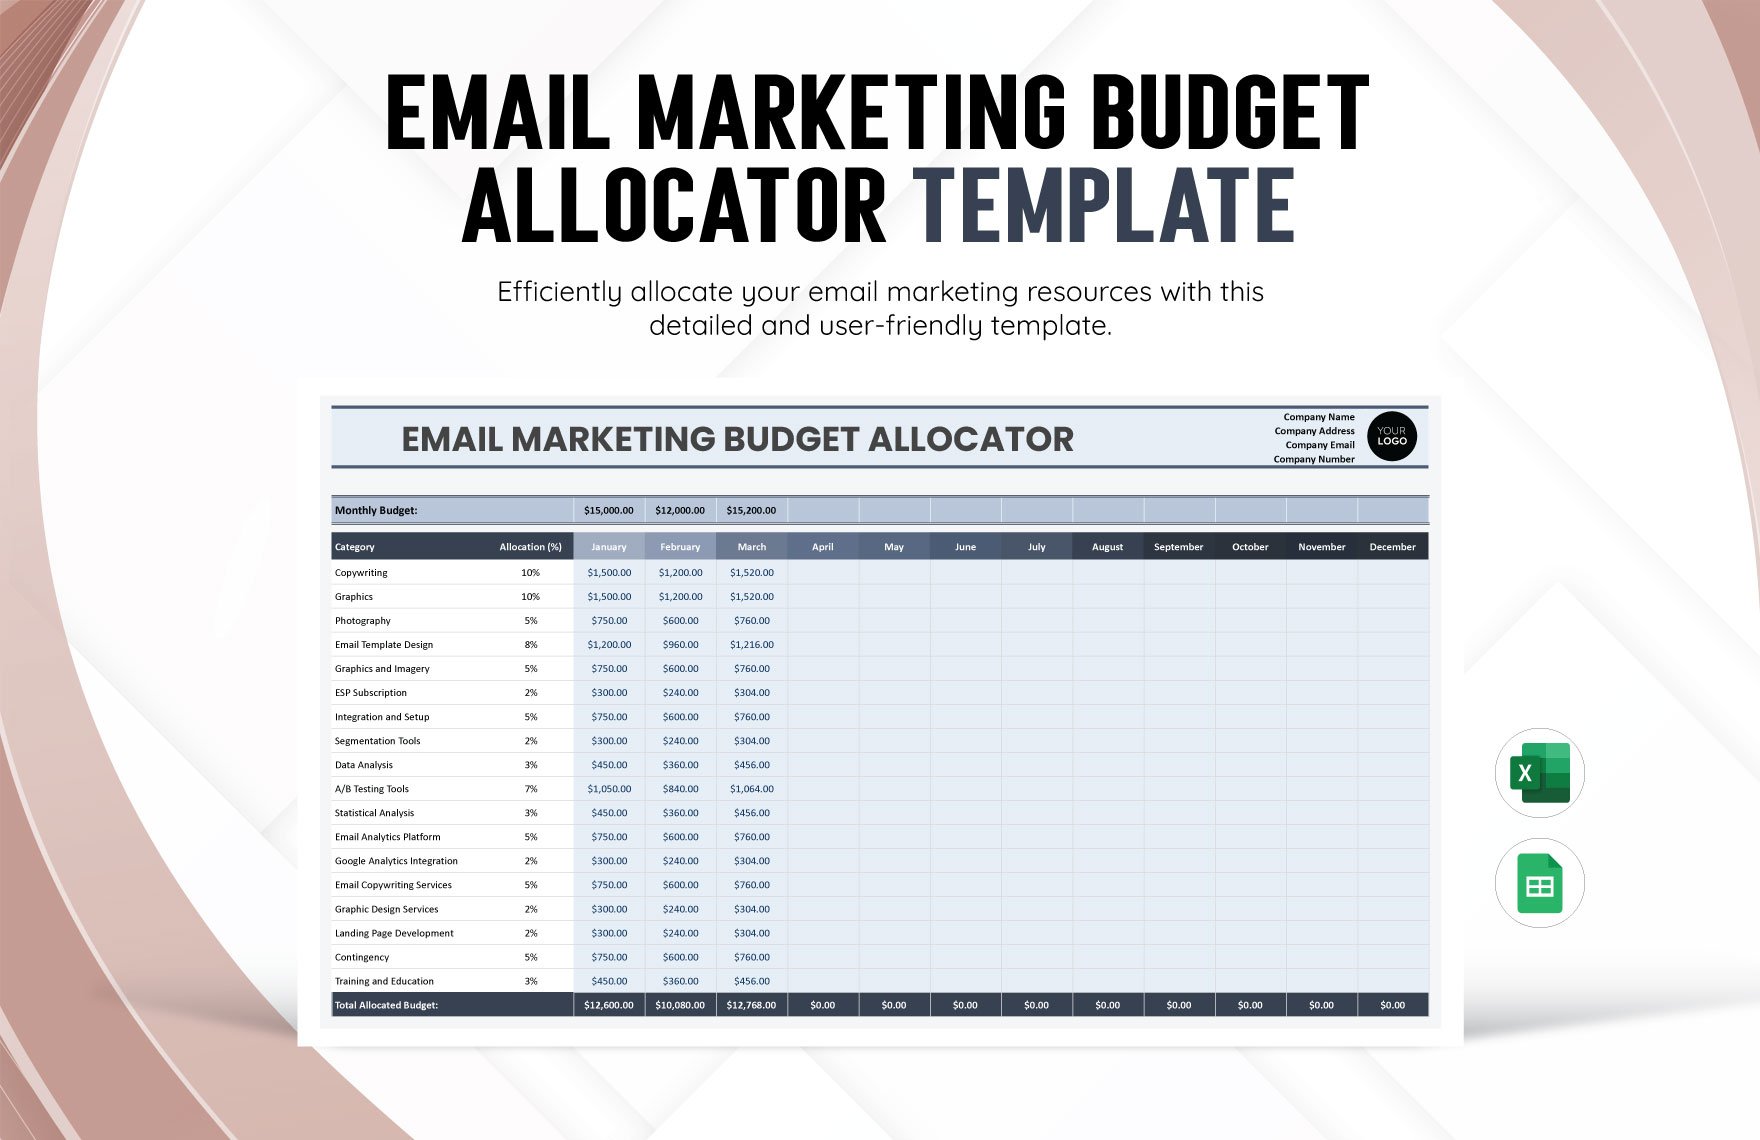 Email Marketing Budget Allocator Template in Excel, Google Sheets